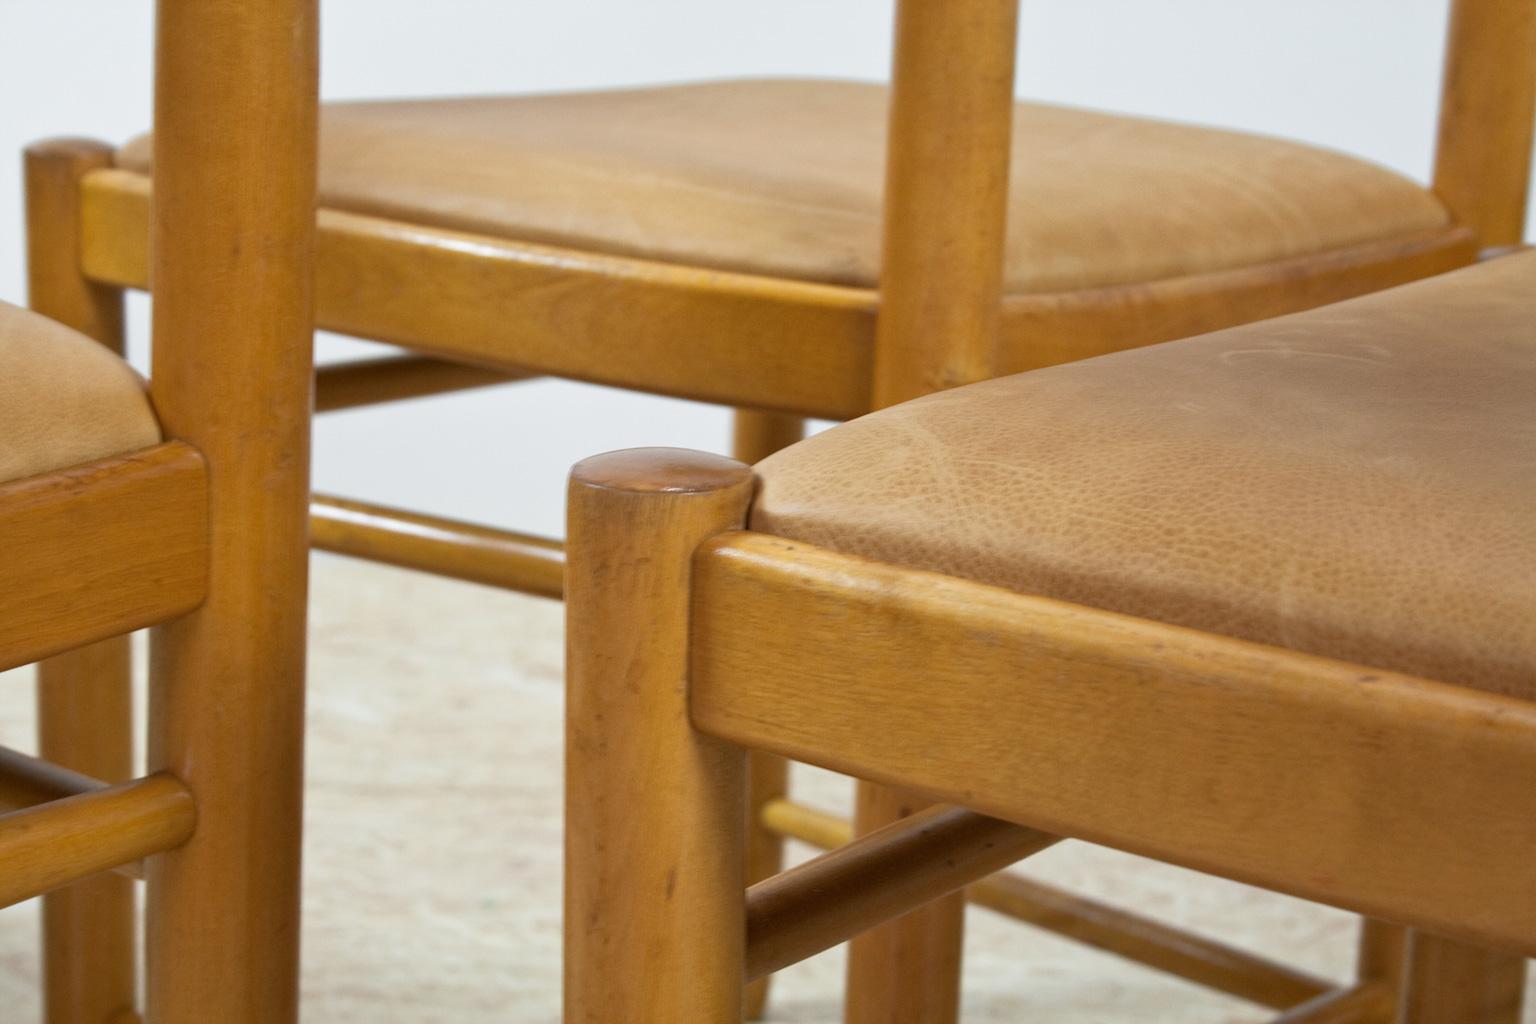 Scandinavian Modern Dining Room Chairs in Beech and Tan Leather, 1960s Set of 7  For Sale 2